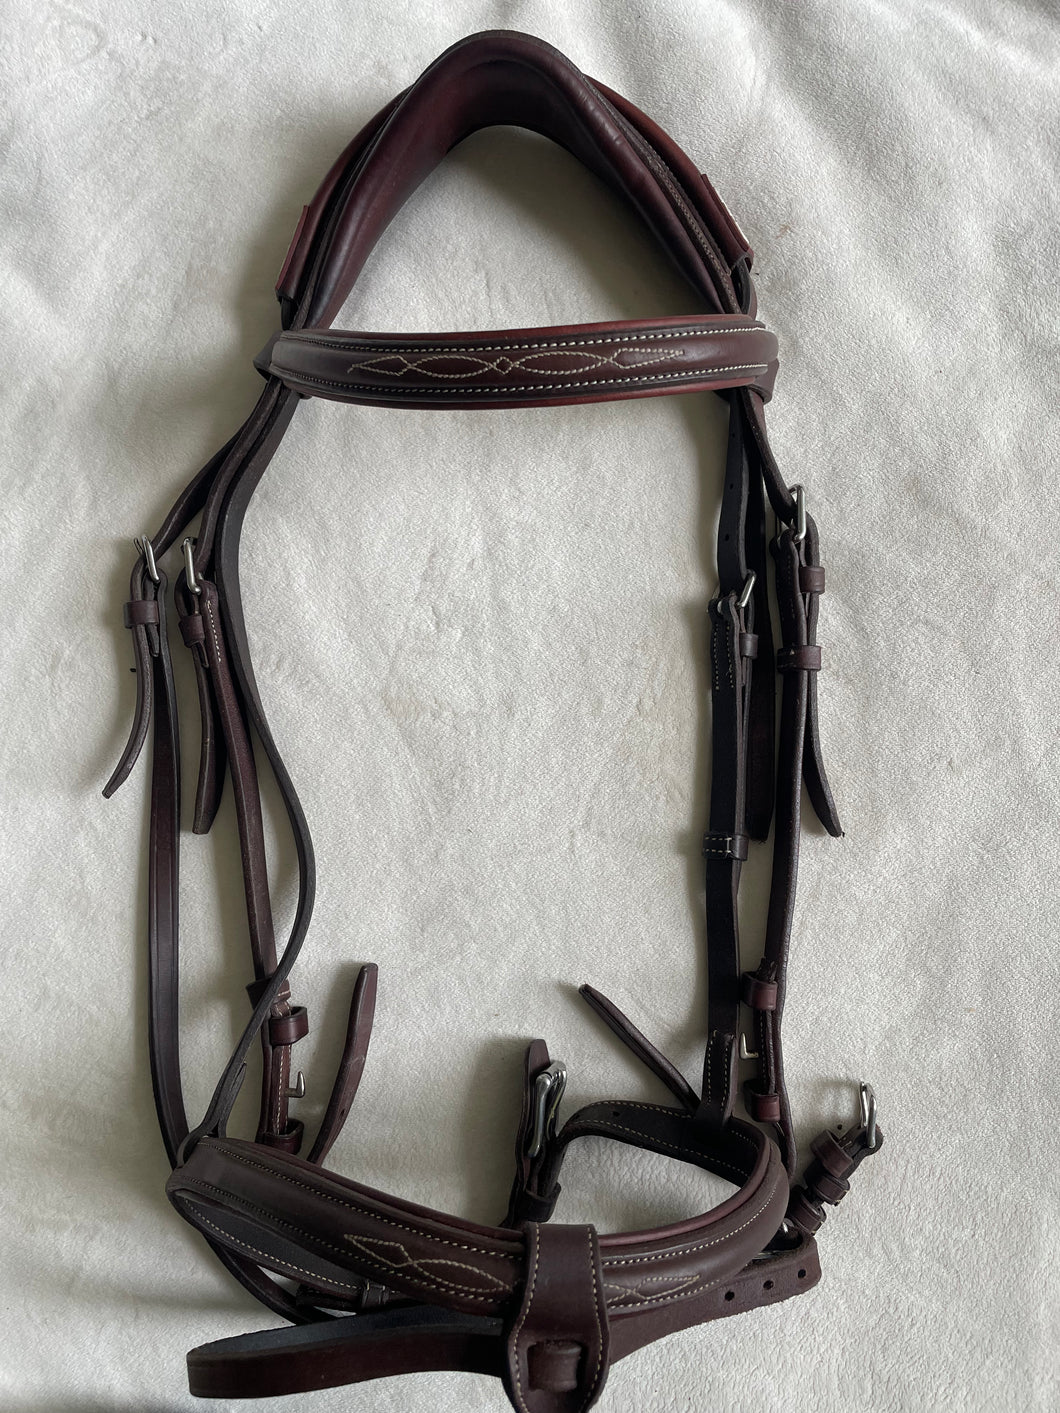 CWD Anatomic French Noseband Fancy Stitched Bridle, Size 2, Barely Used Condition